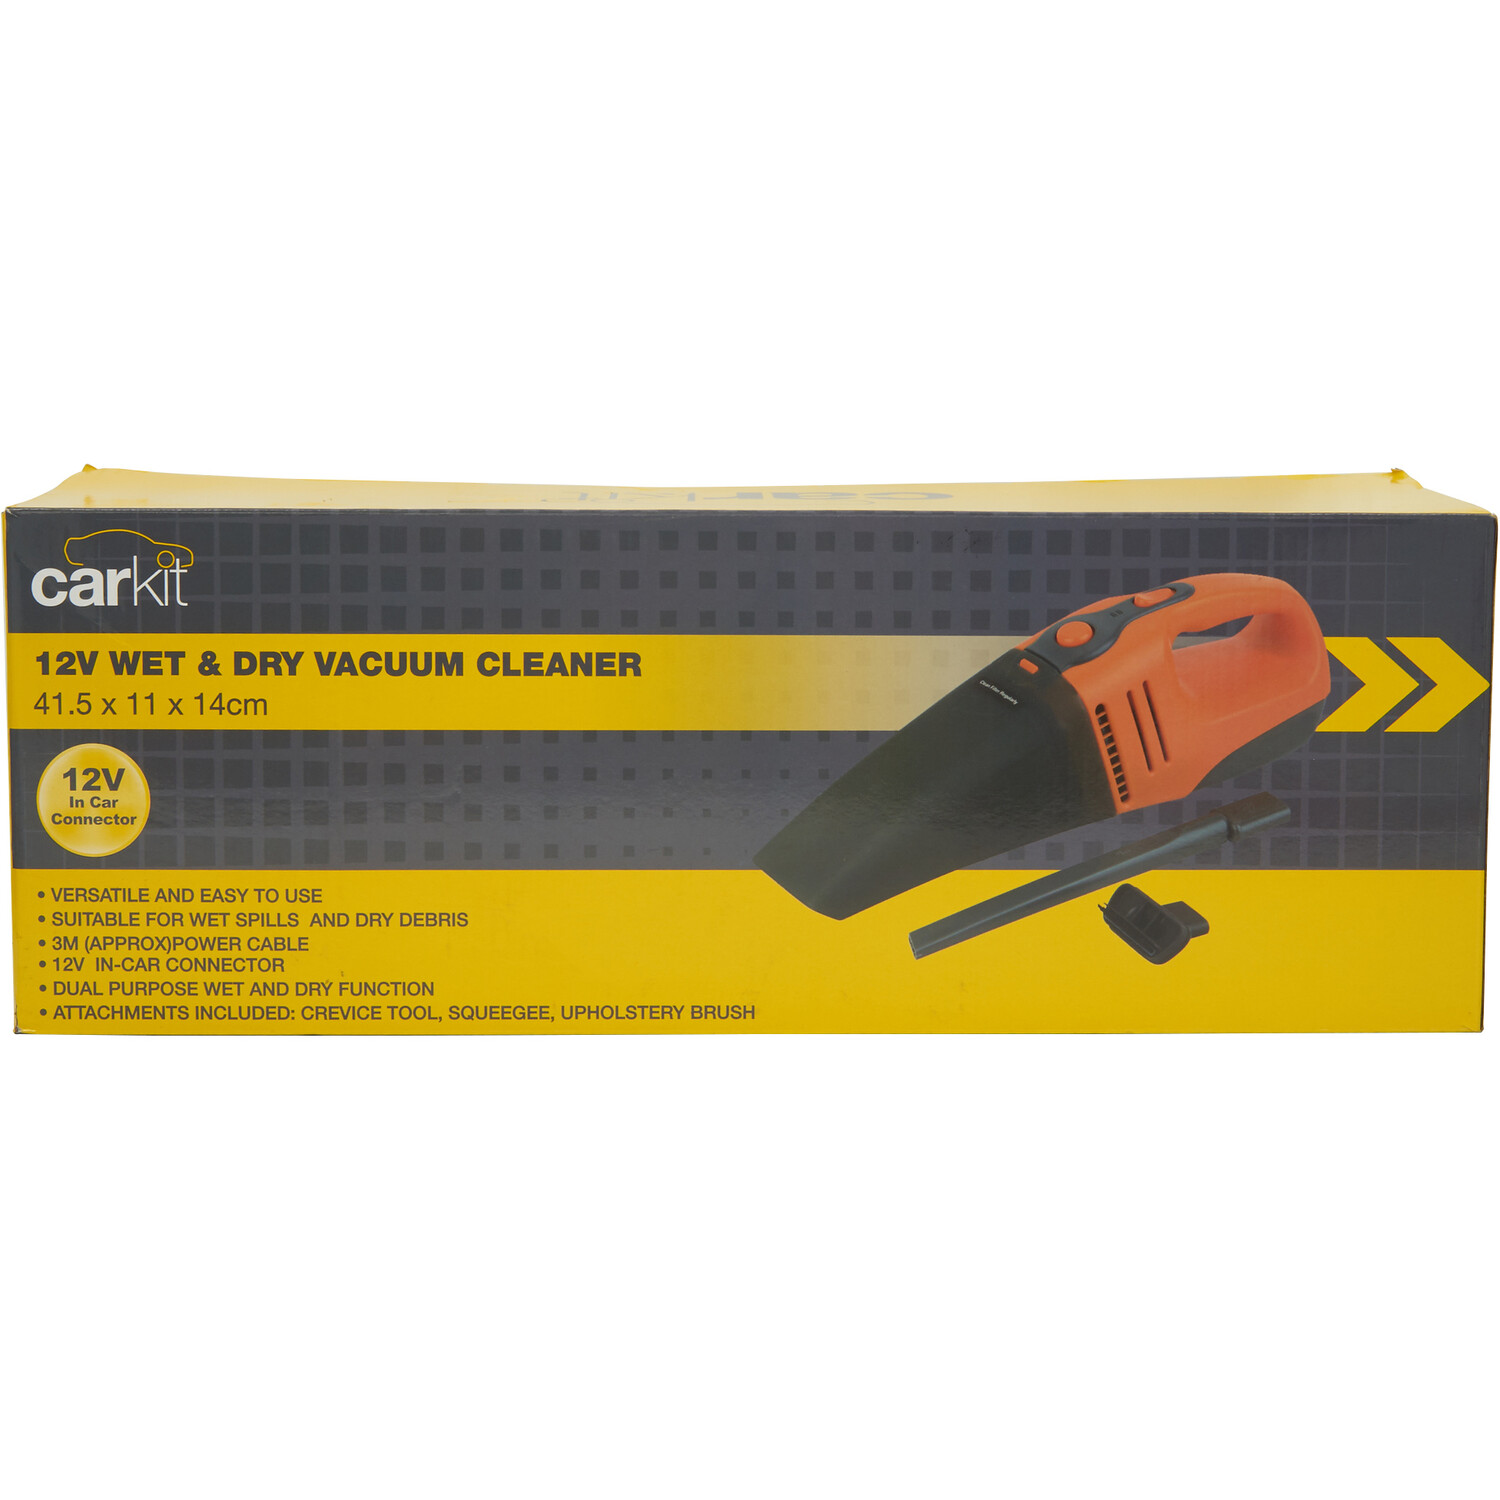 Carkit 12V Wet and Dry Car Vacuum Cleaner Image 1